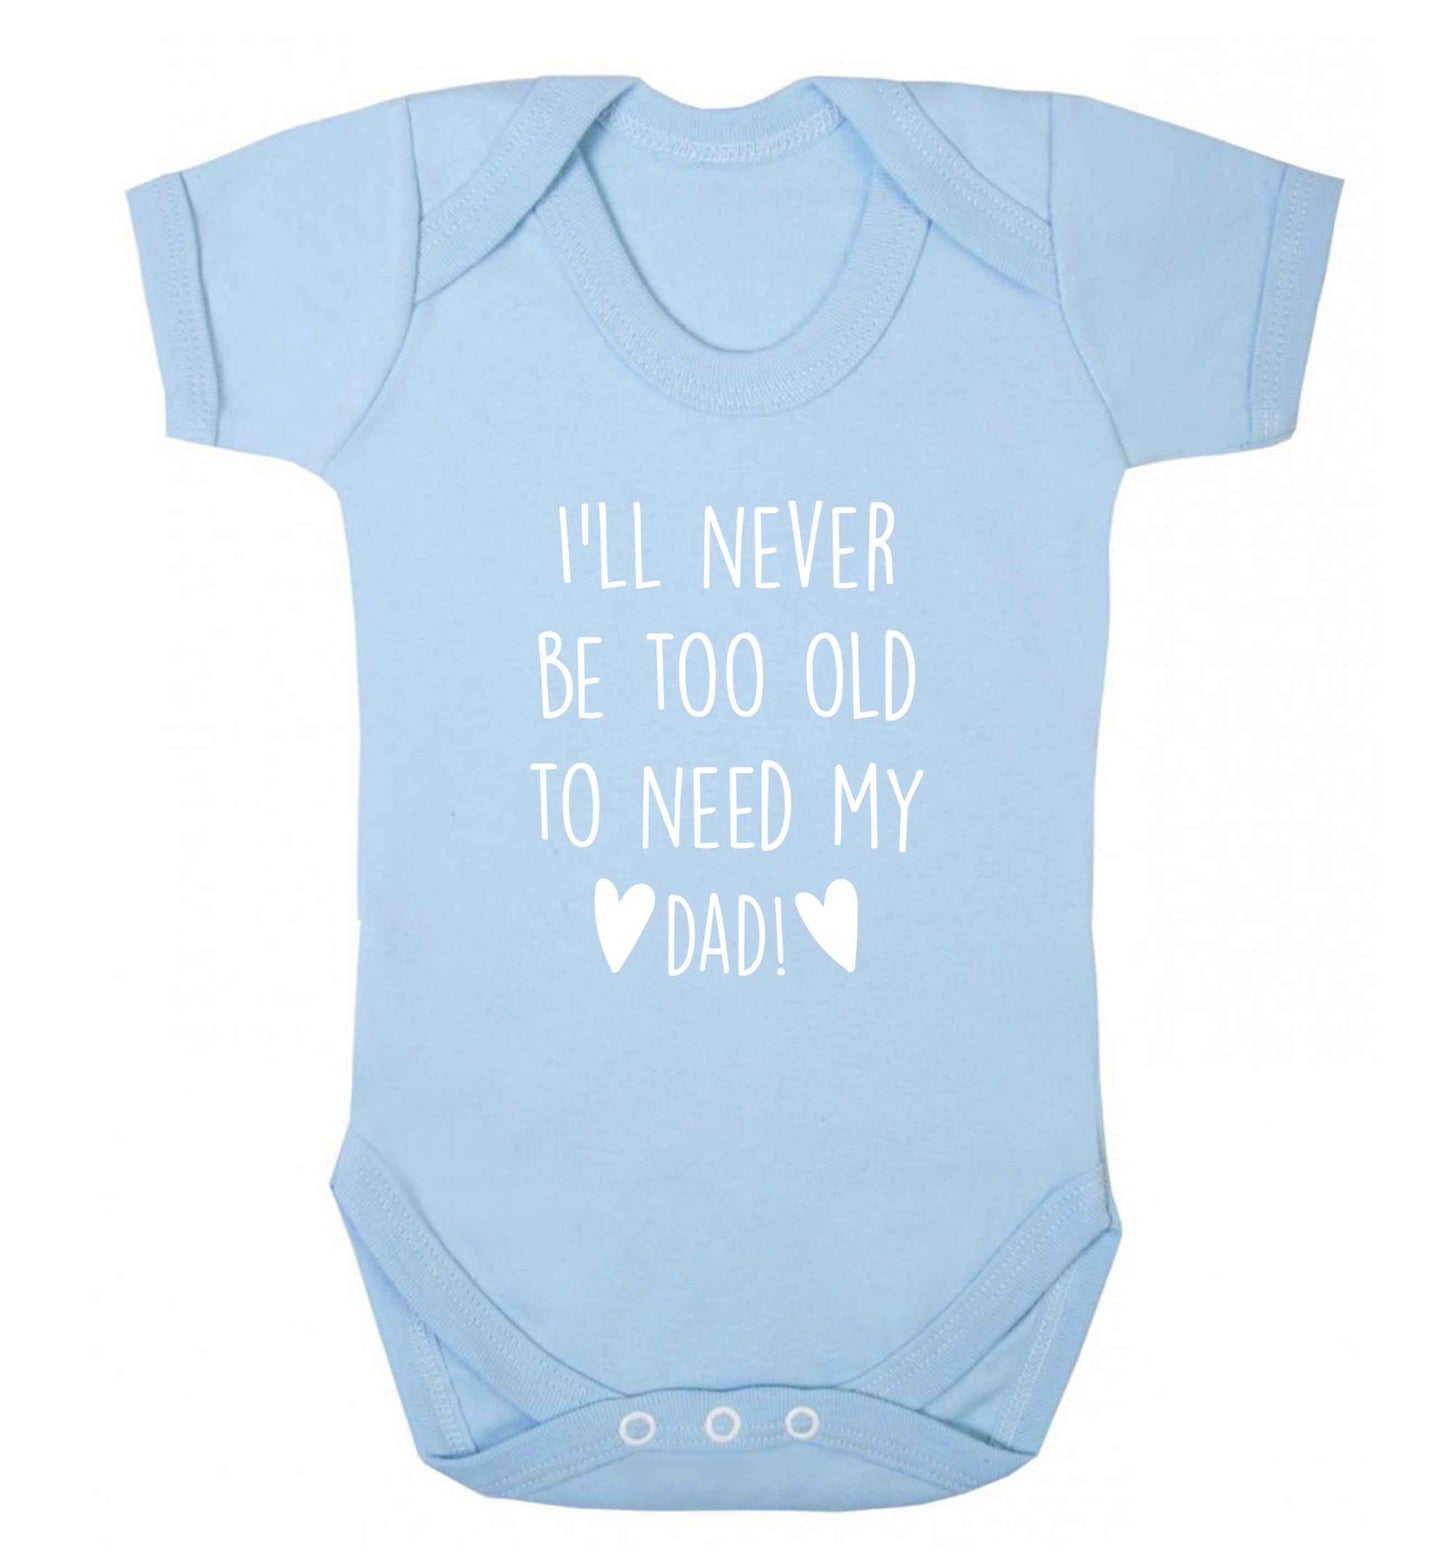 I'll never be too old to need my dad baby vest pale blue 18-24 months